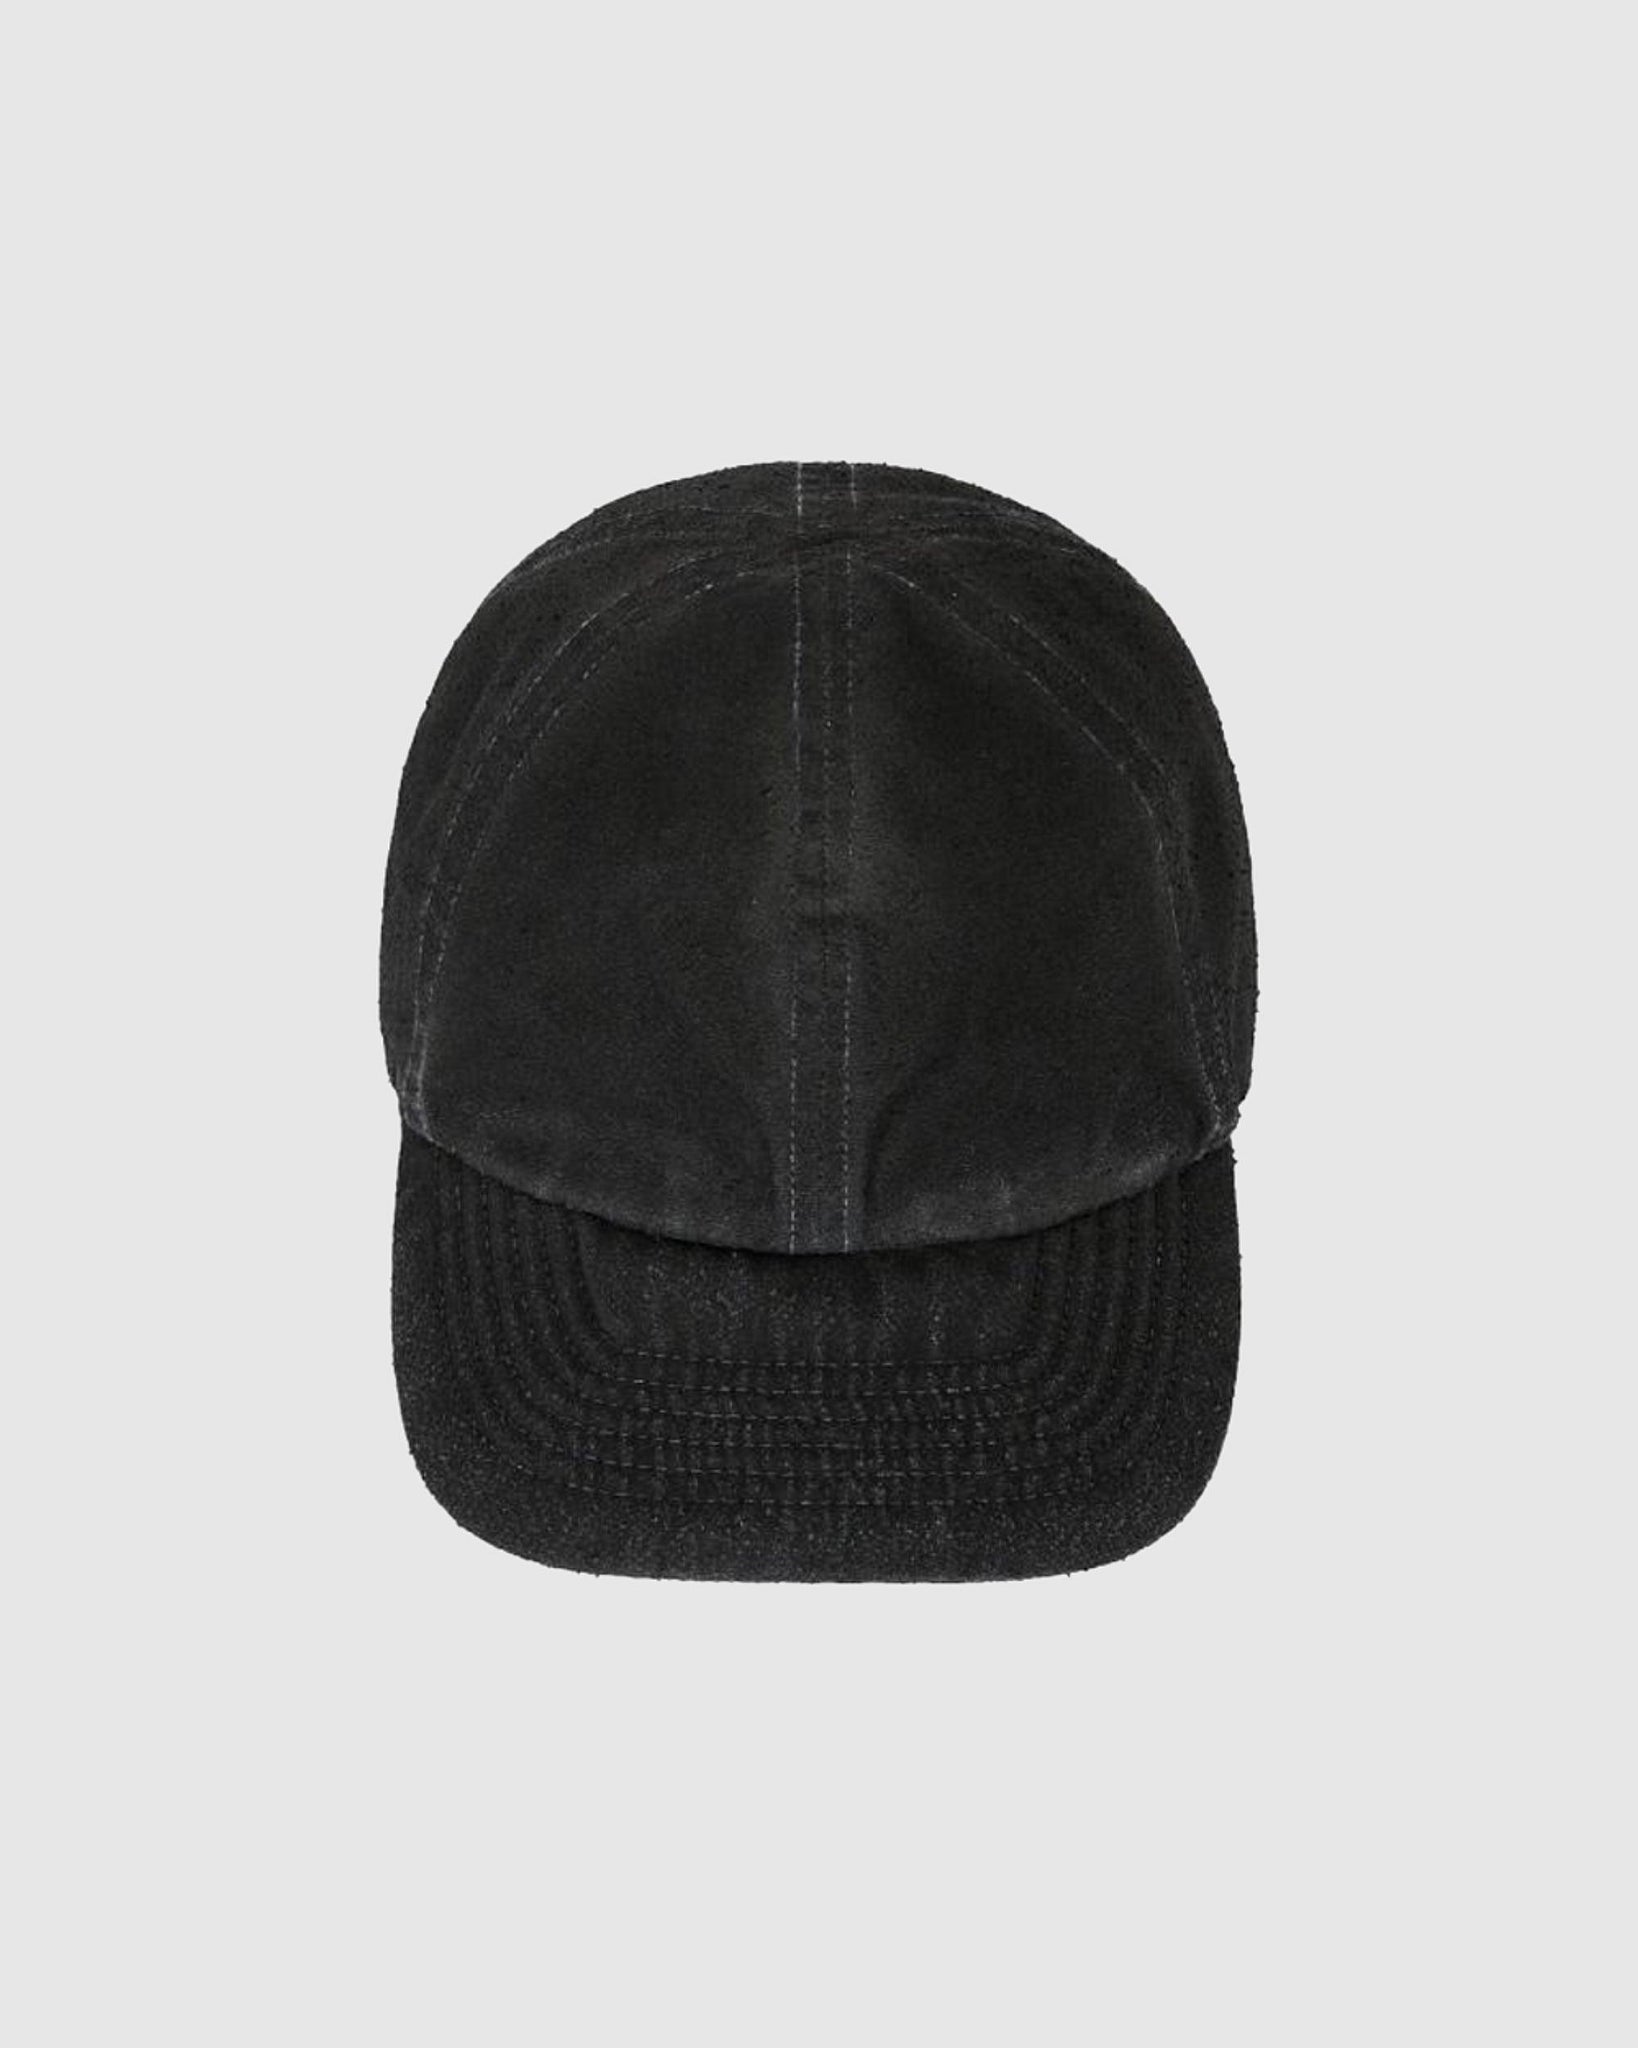 Black EP.3 01 Cap - {{ collection.title }} - Chinatown Country Club 